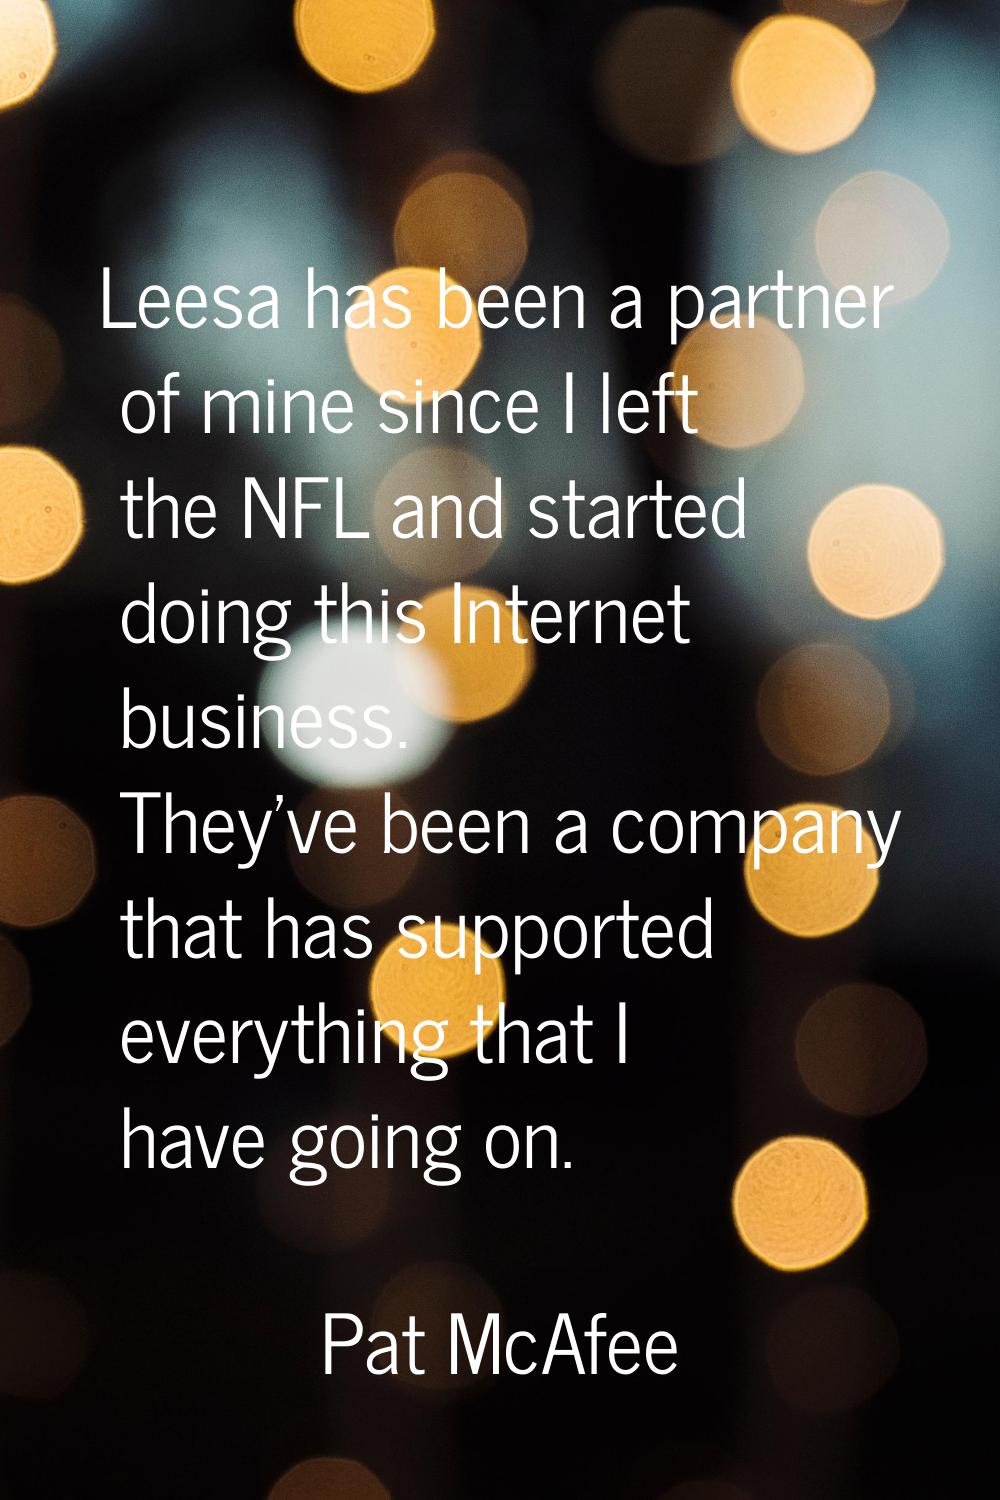 Leesa has been a partner of mine since I left the NFL and started doing this Internet business. The